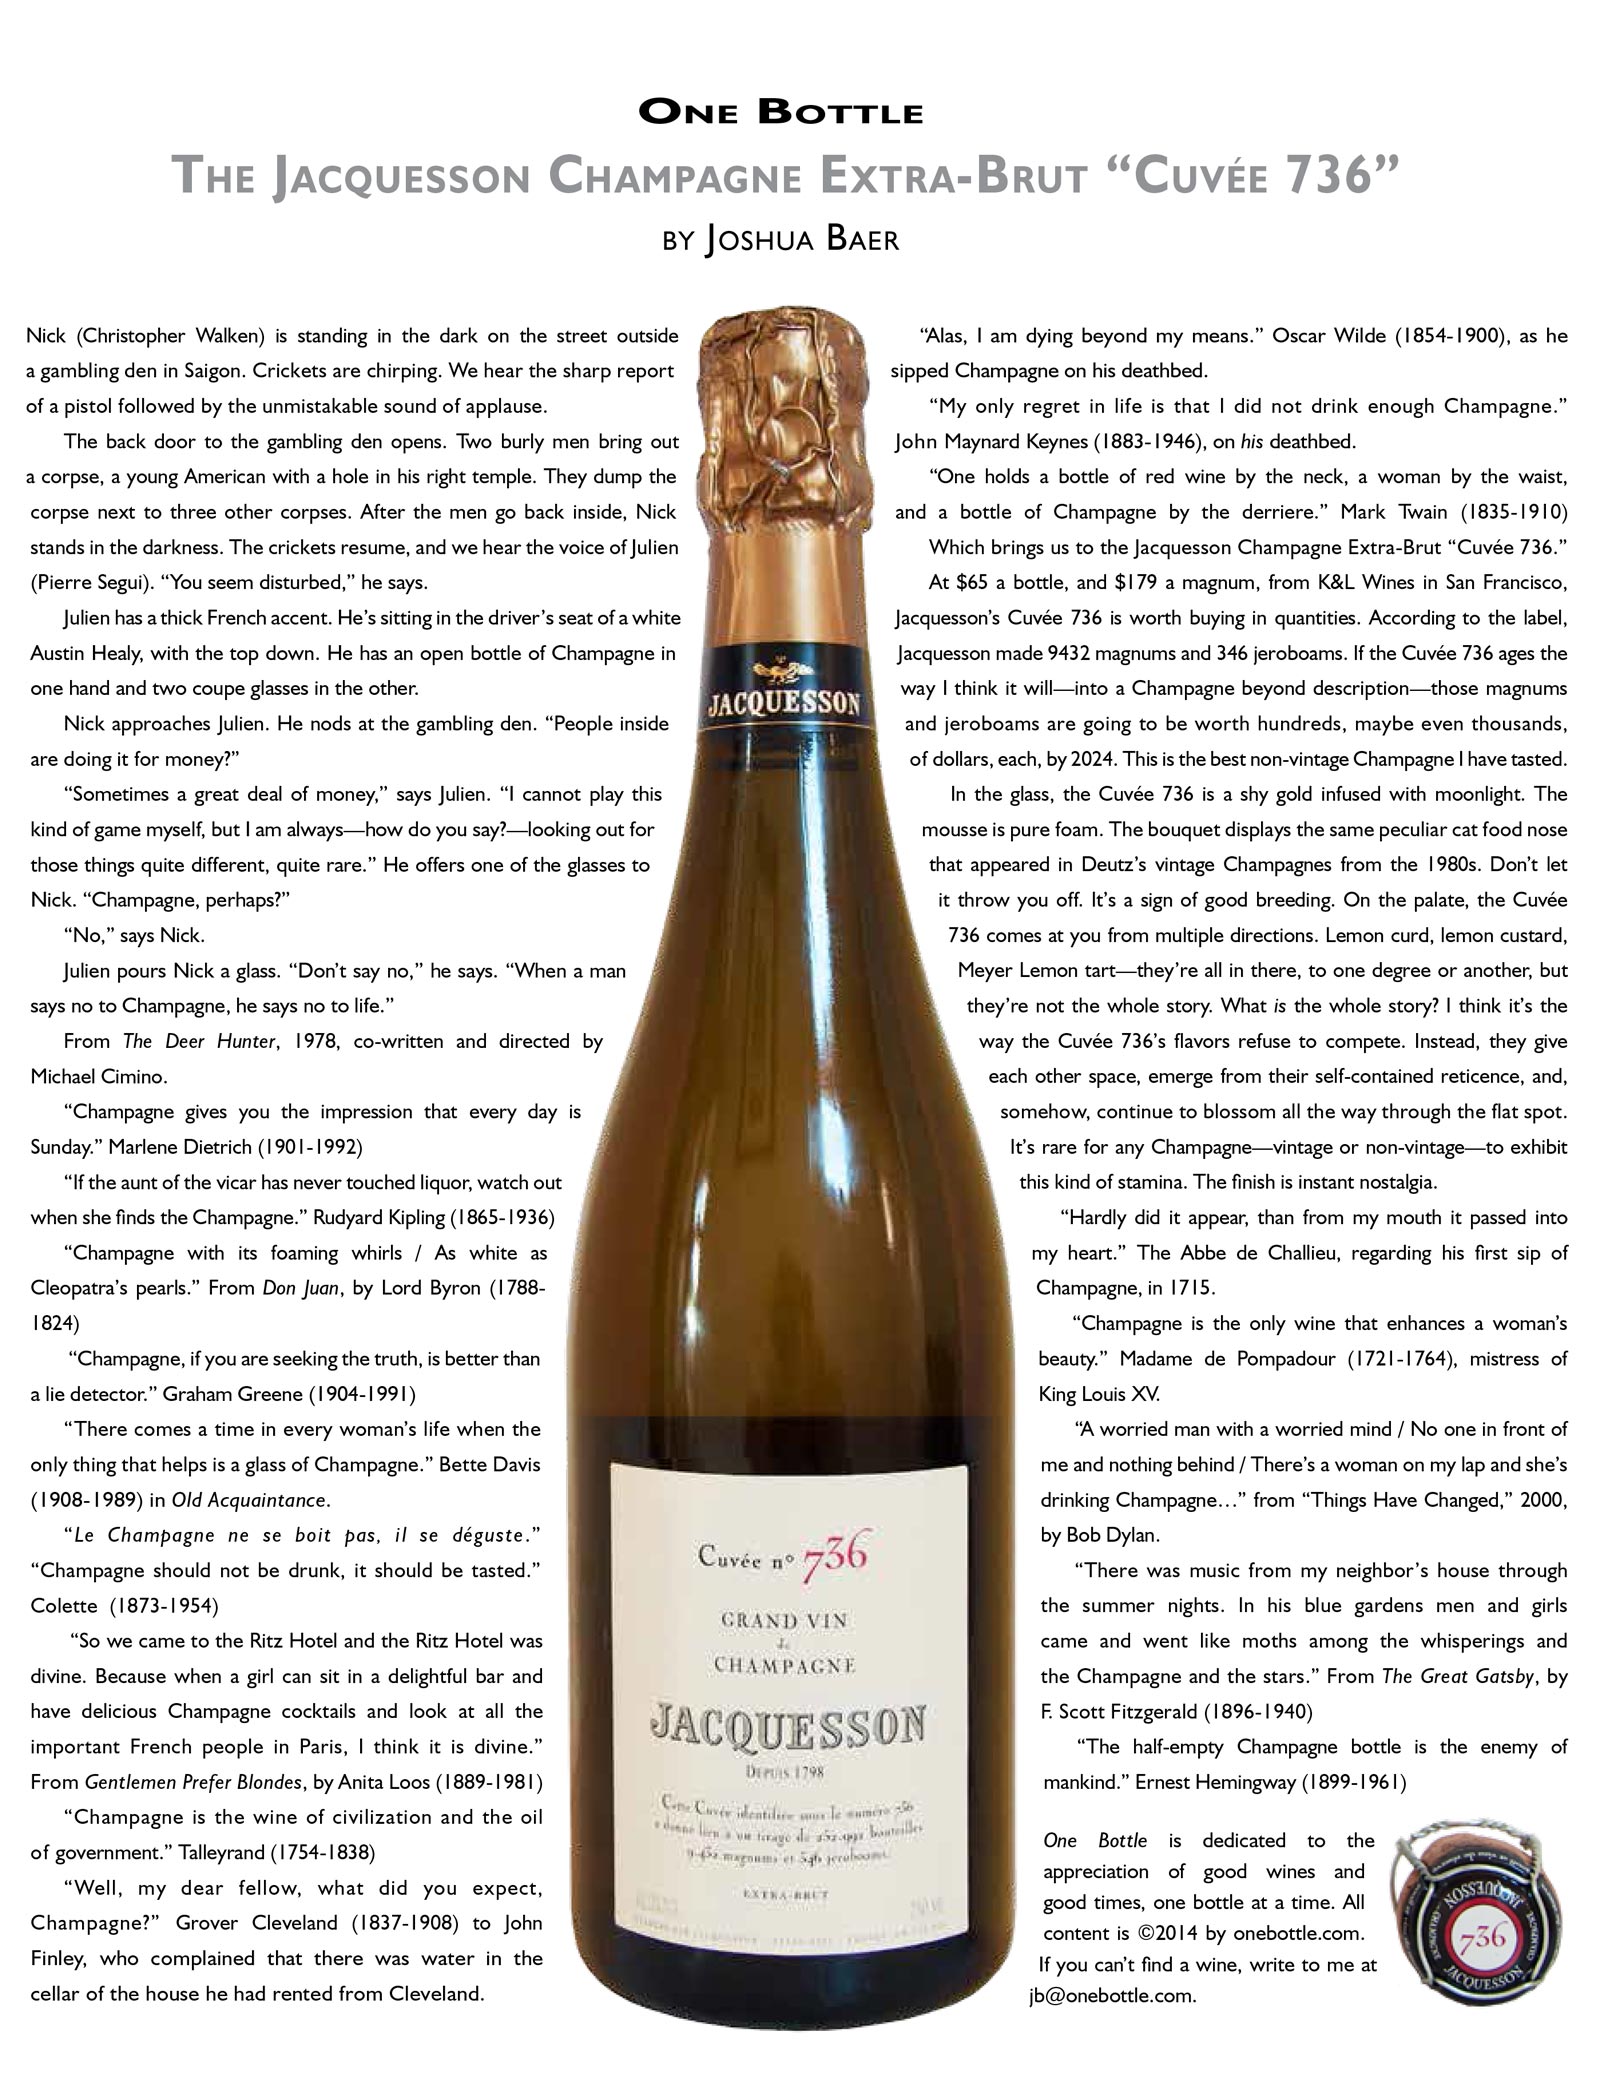 Jacquesson Champagne Extra-Brut Cuvee 736